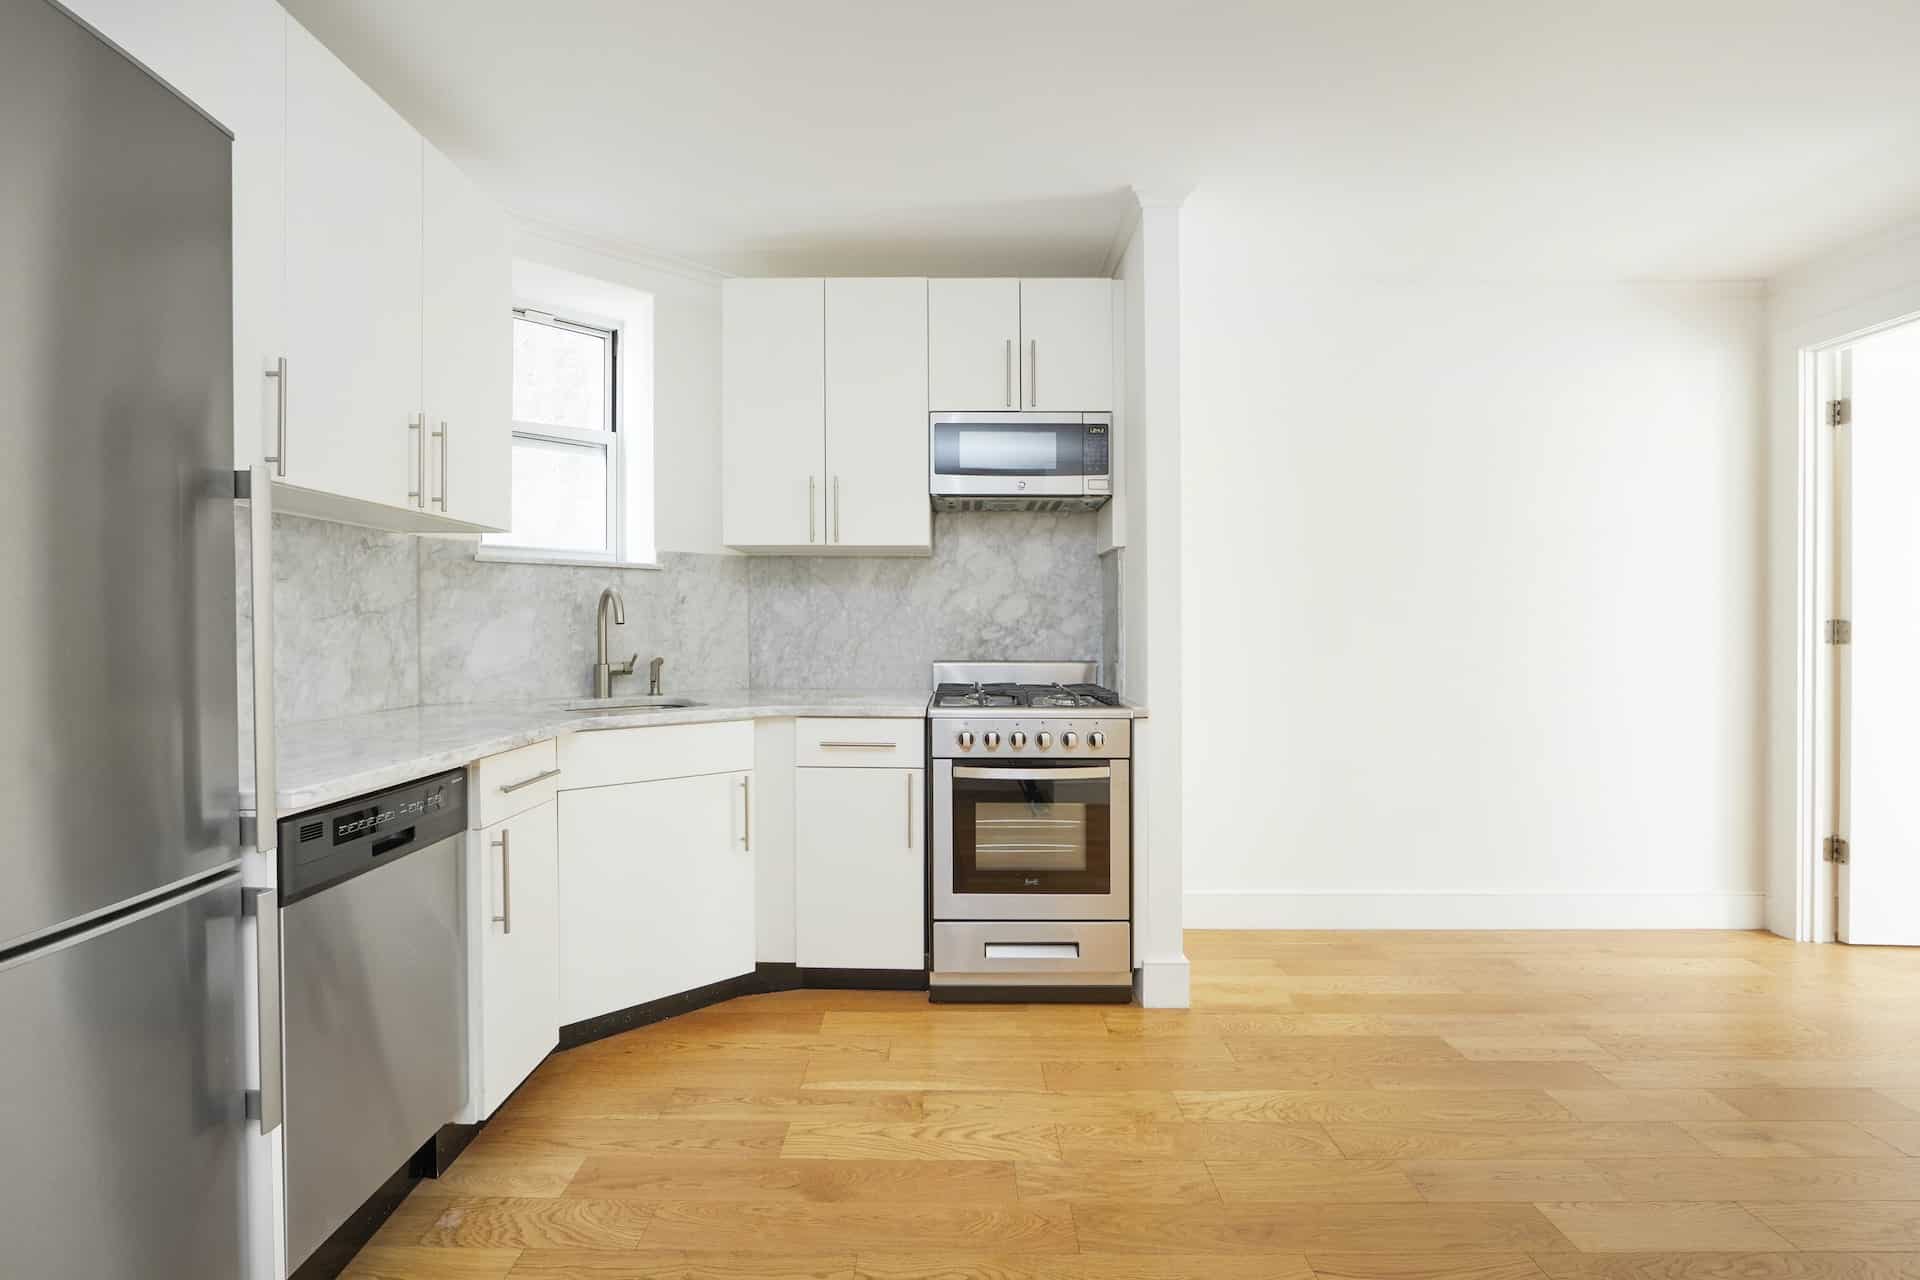 Kitchen at 207 East 33rd Street apartments with stone countertops, white cabinets, stainless steel appliances & hardwoods.